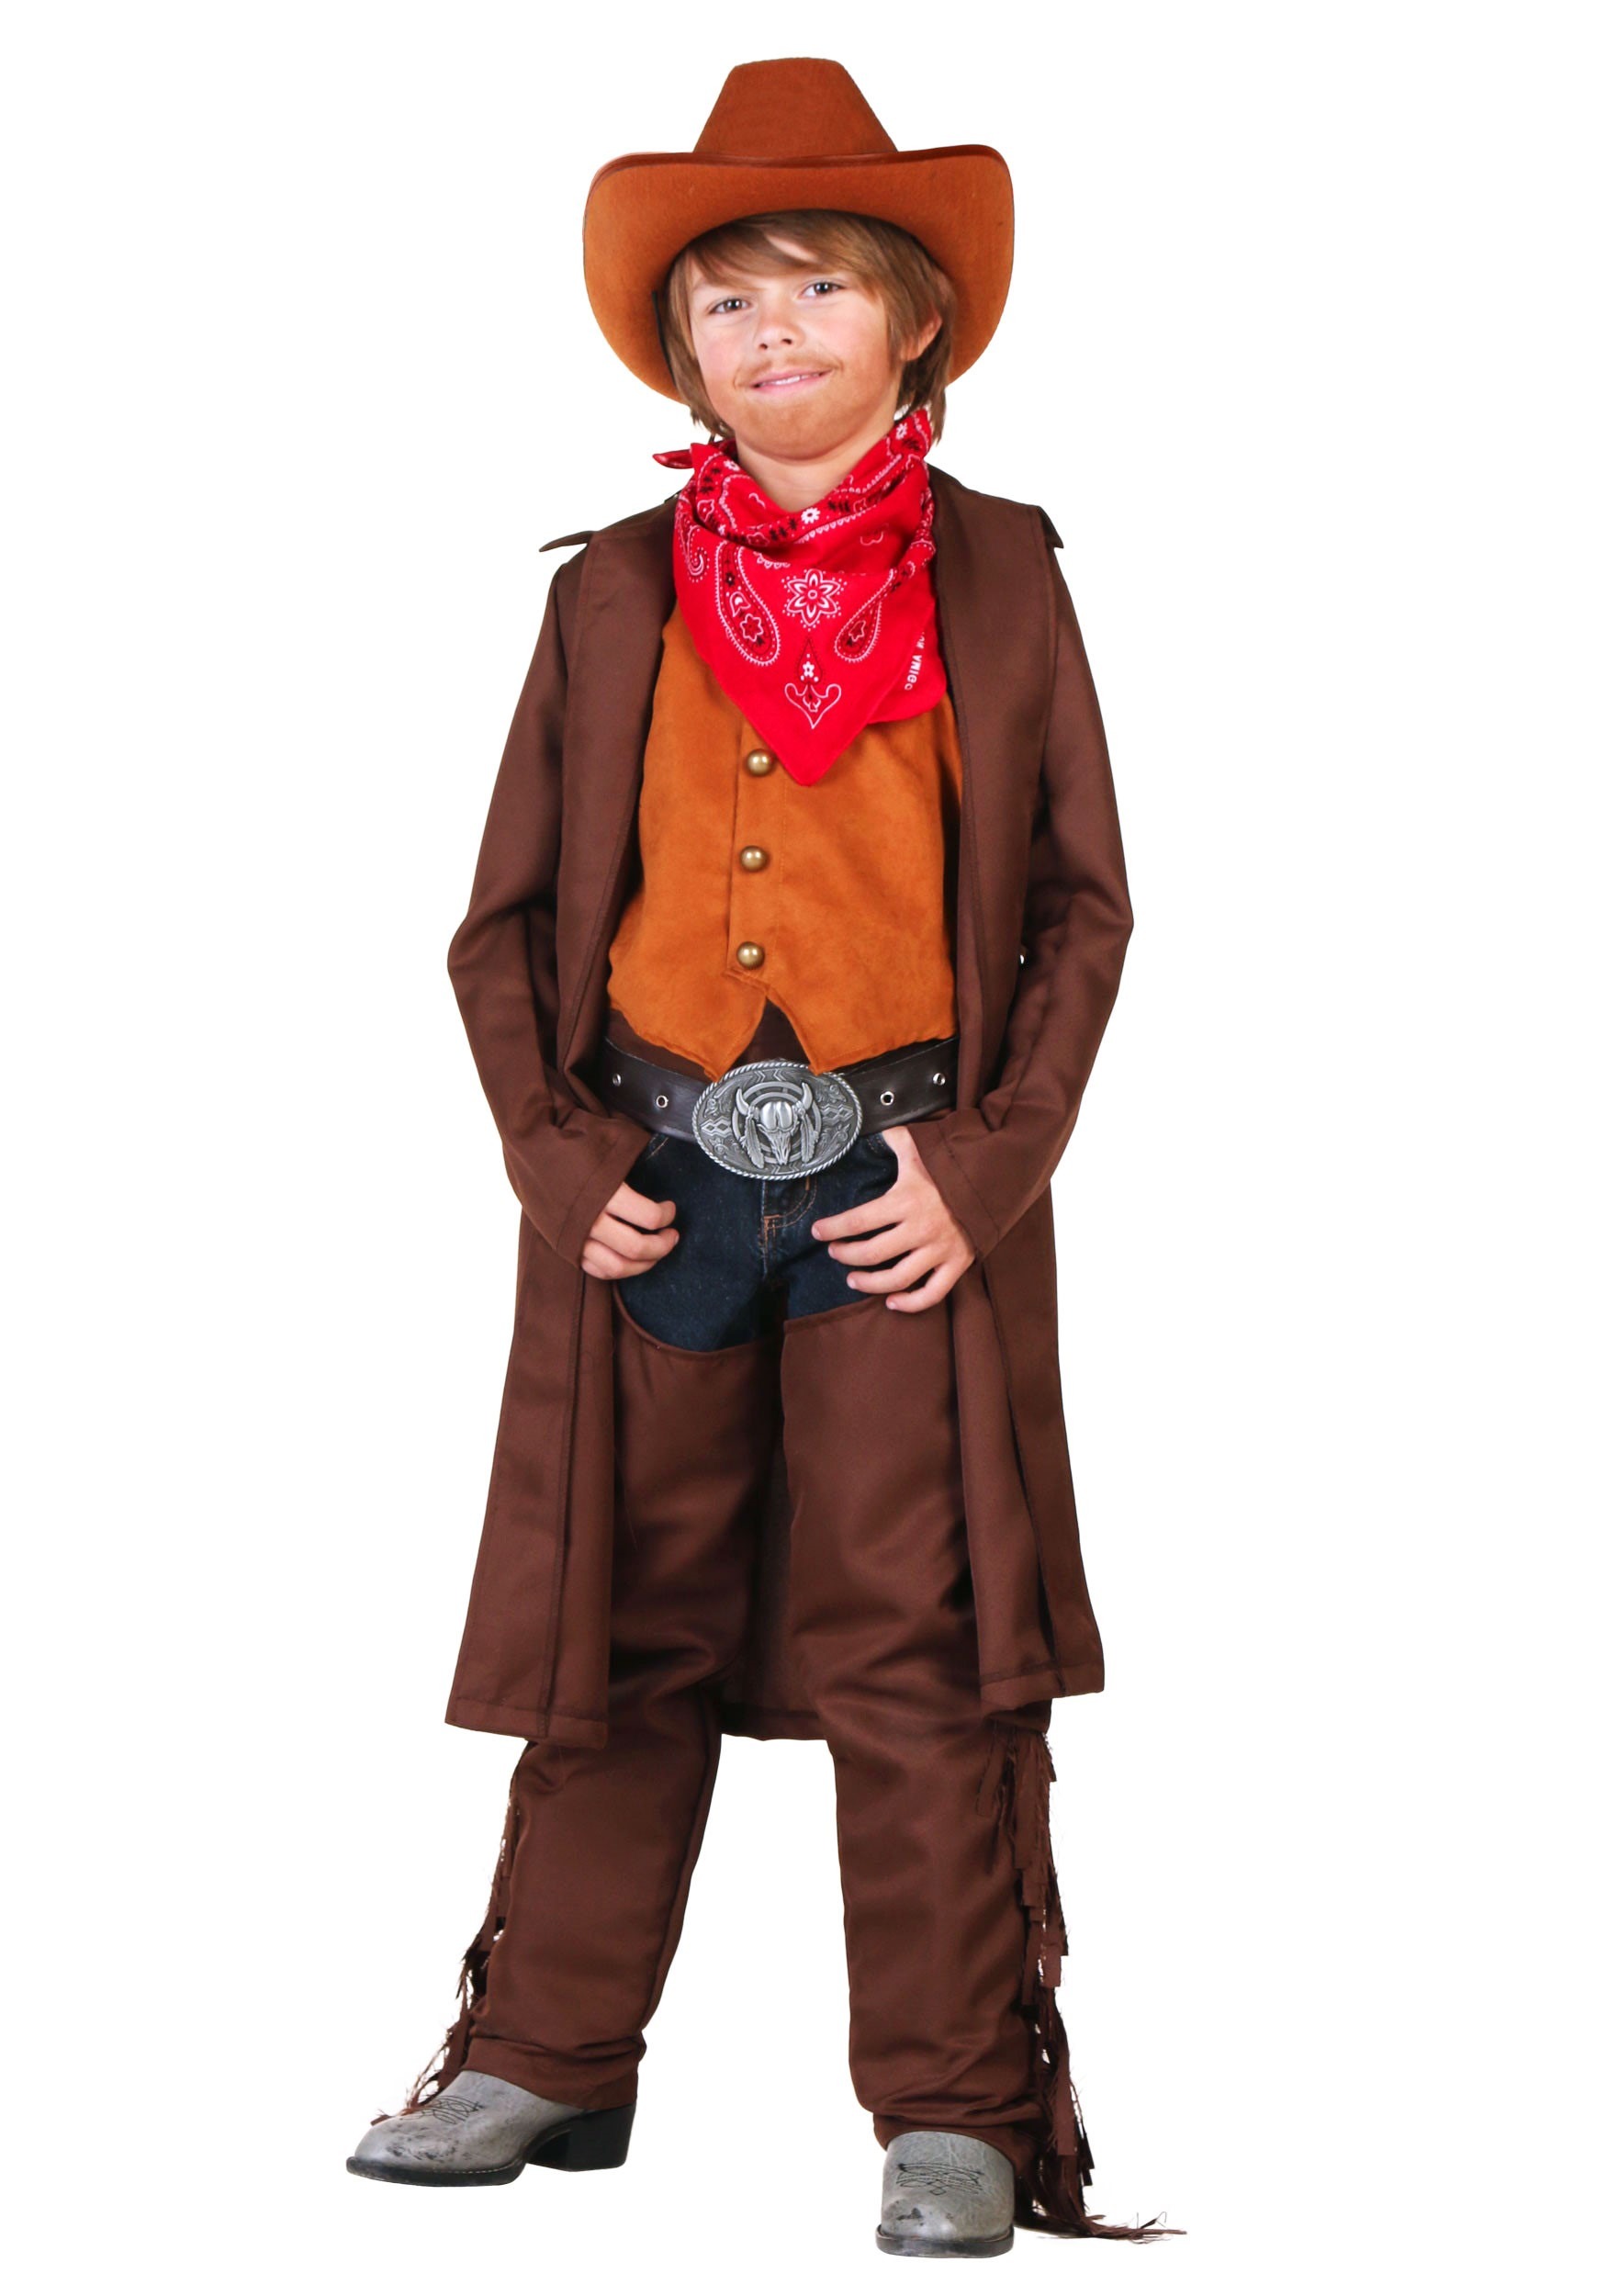 Photos - Fancy Dress FUN Costumes Cowboy Costume for Boys | Exclusive Halloween Costumes Yellow